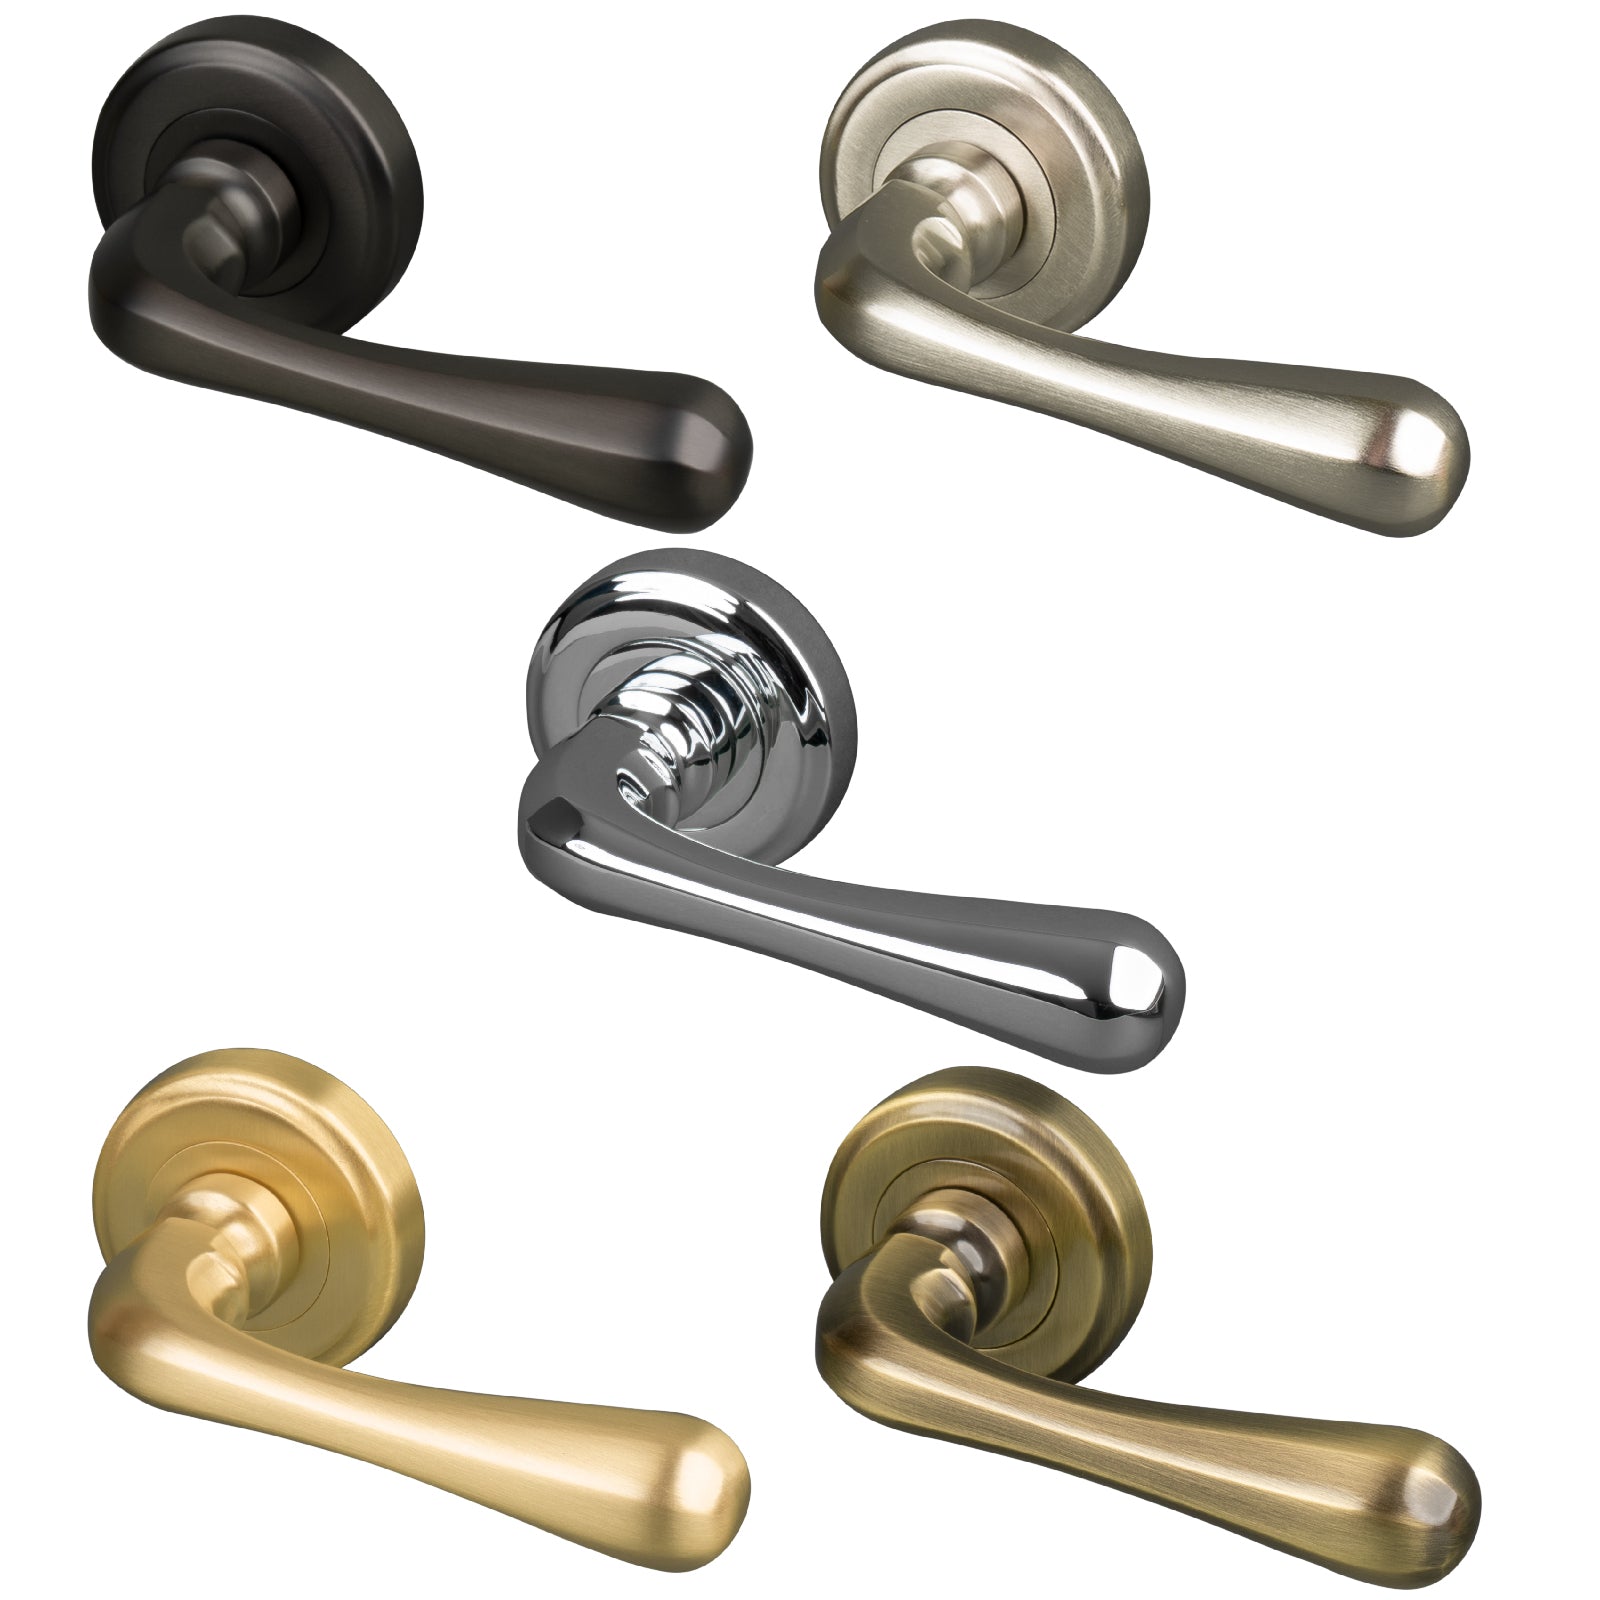 Charlbury Round Rose Door Handles, Lever On Rose Handles In 5 Finishes